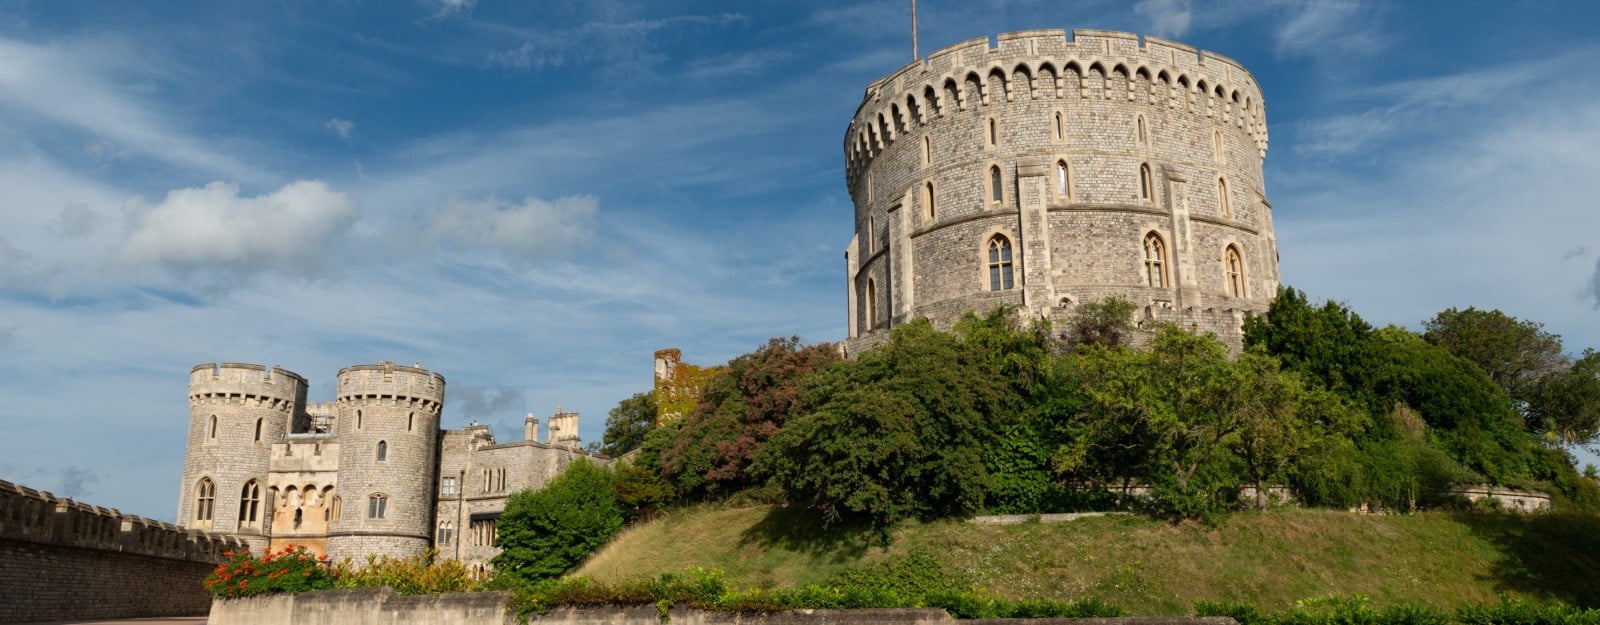 The Round Tower at Windsor Castle